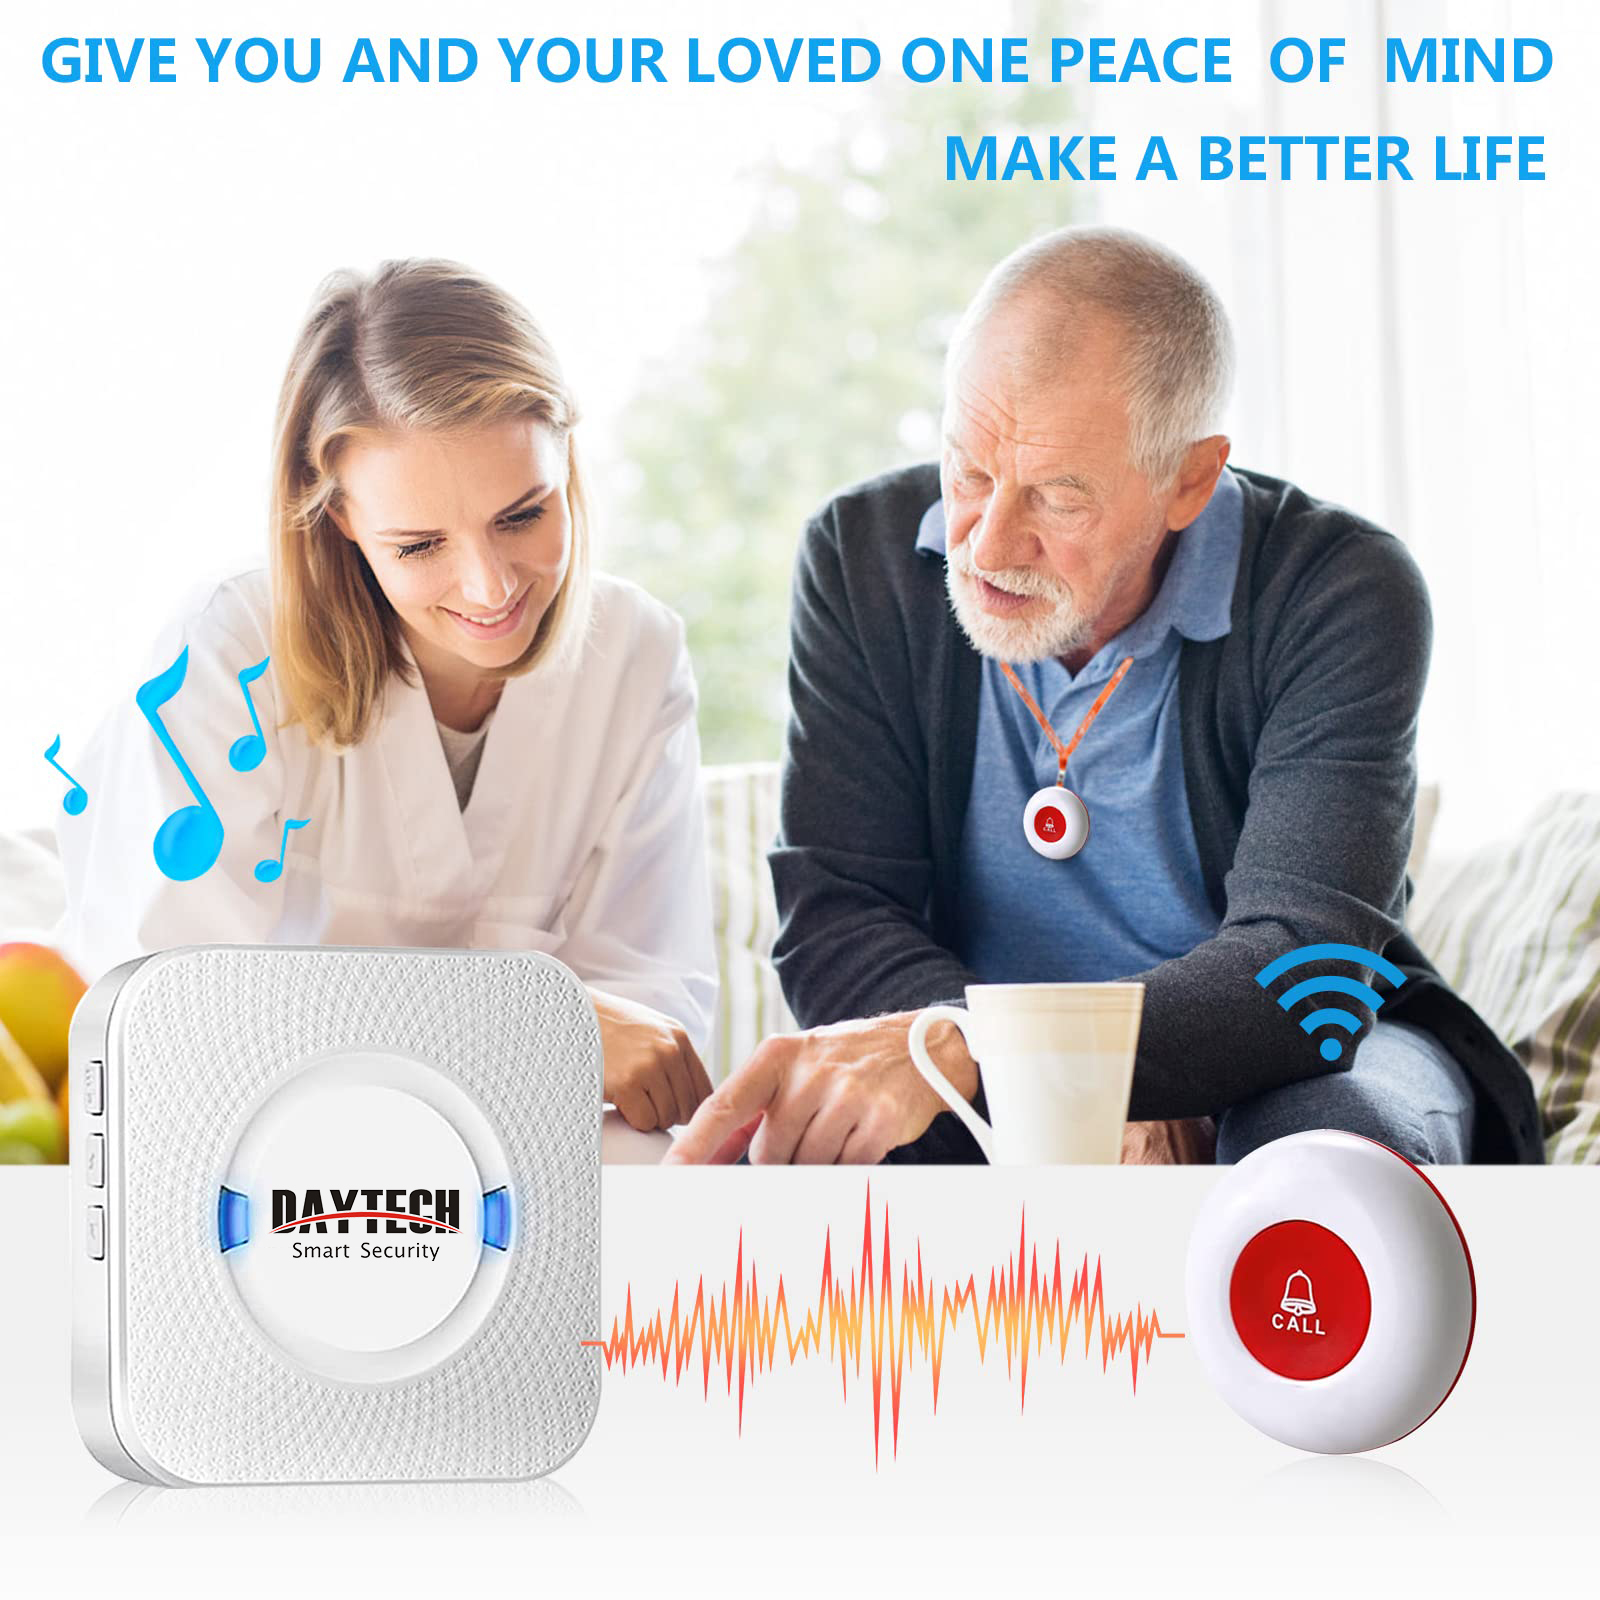 Daytech CC01-4-1 Wireless caregiver Pager for Elderly